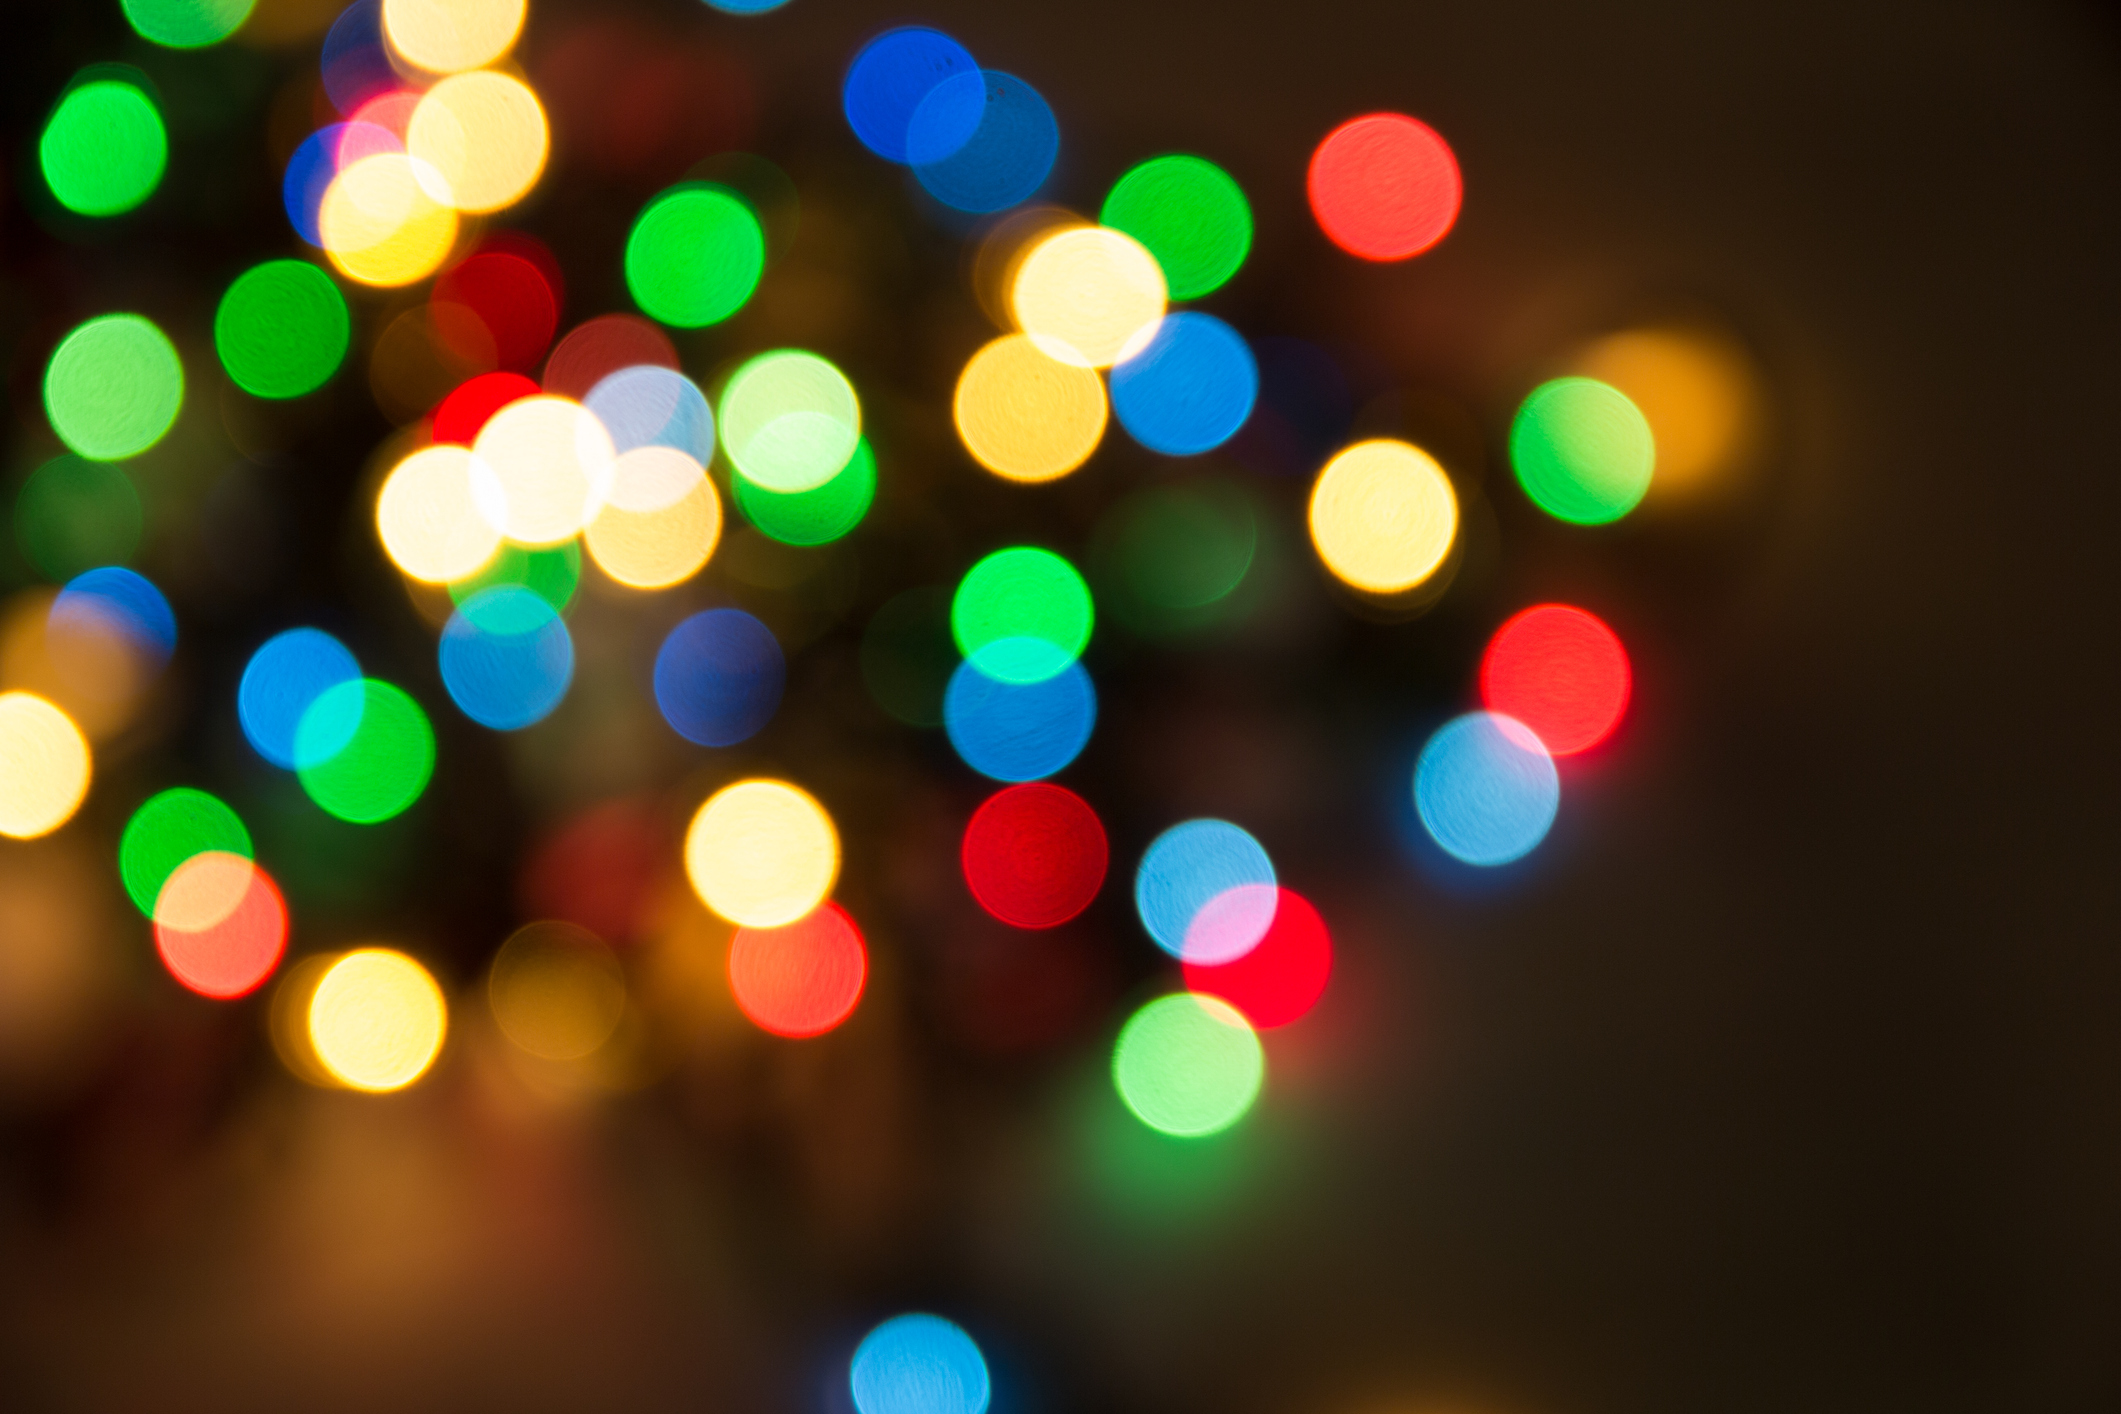 Festive lights out of focus